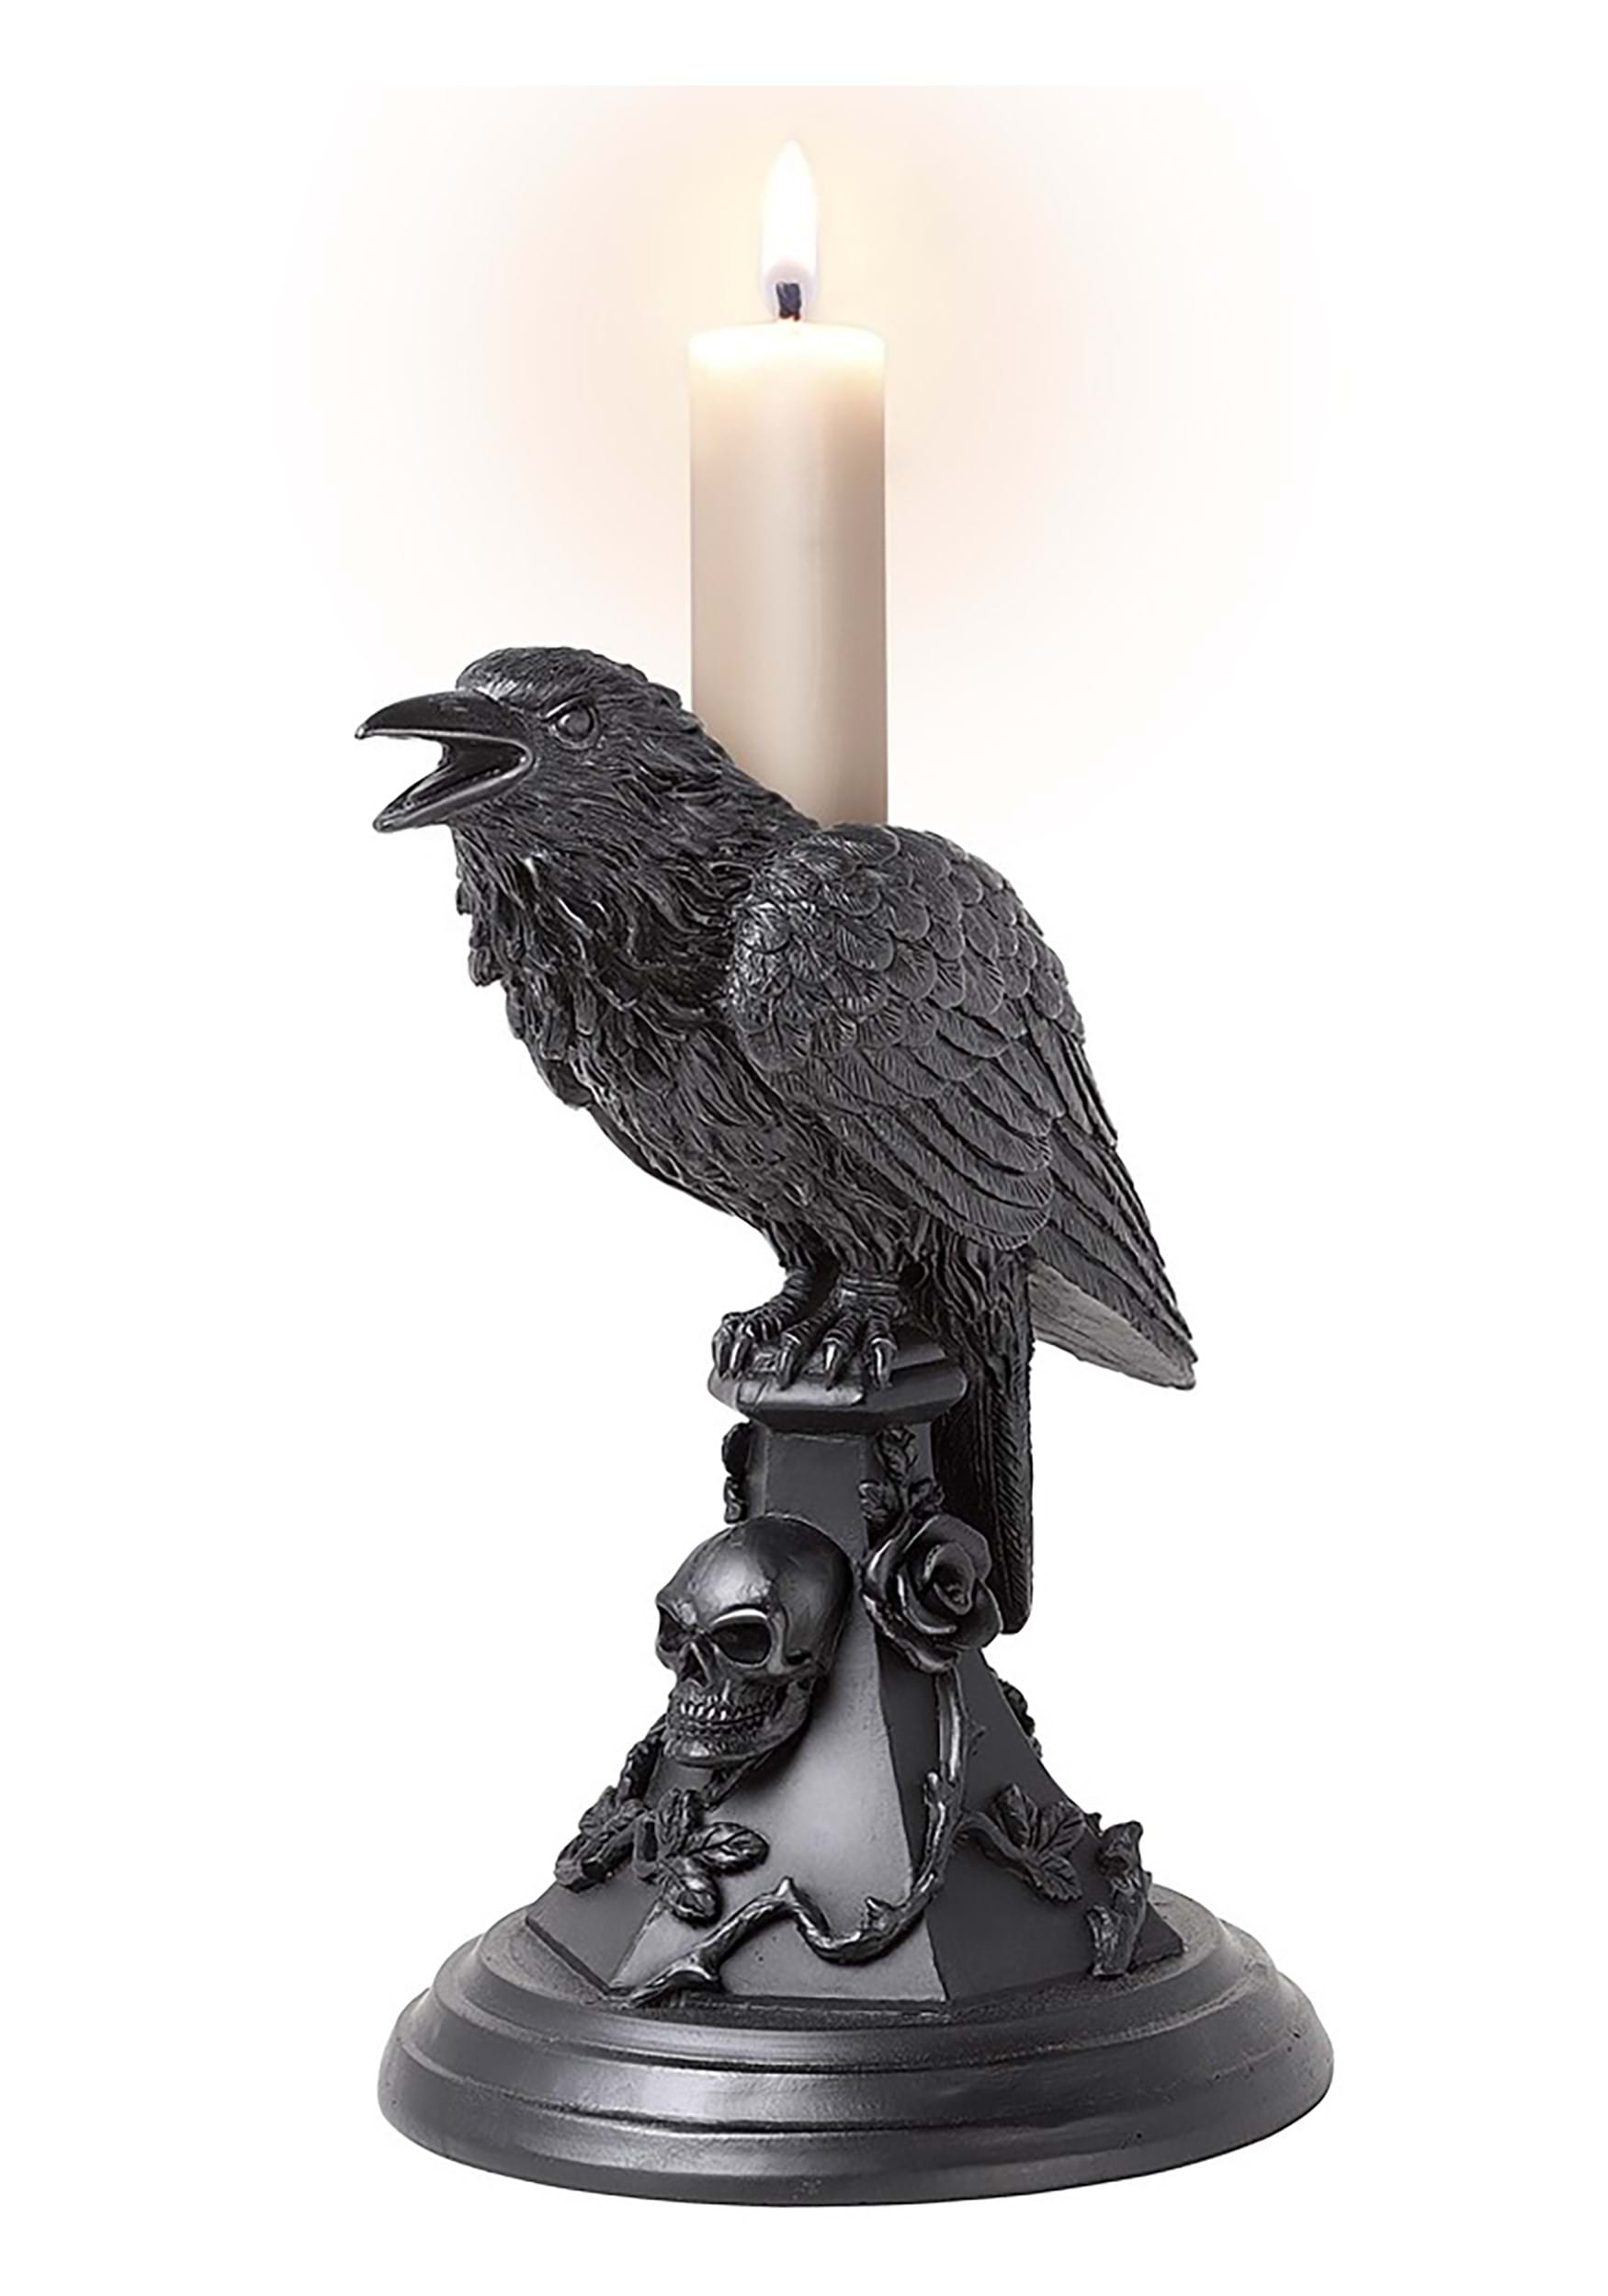 Poe’s Raven Candle Stick Holder